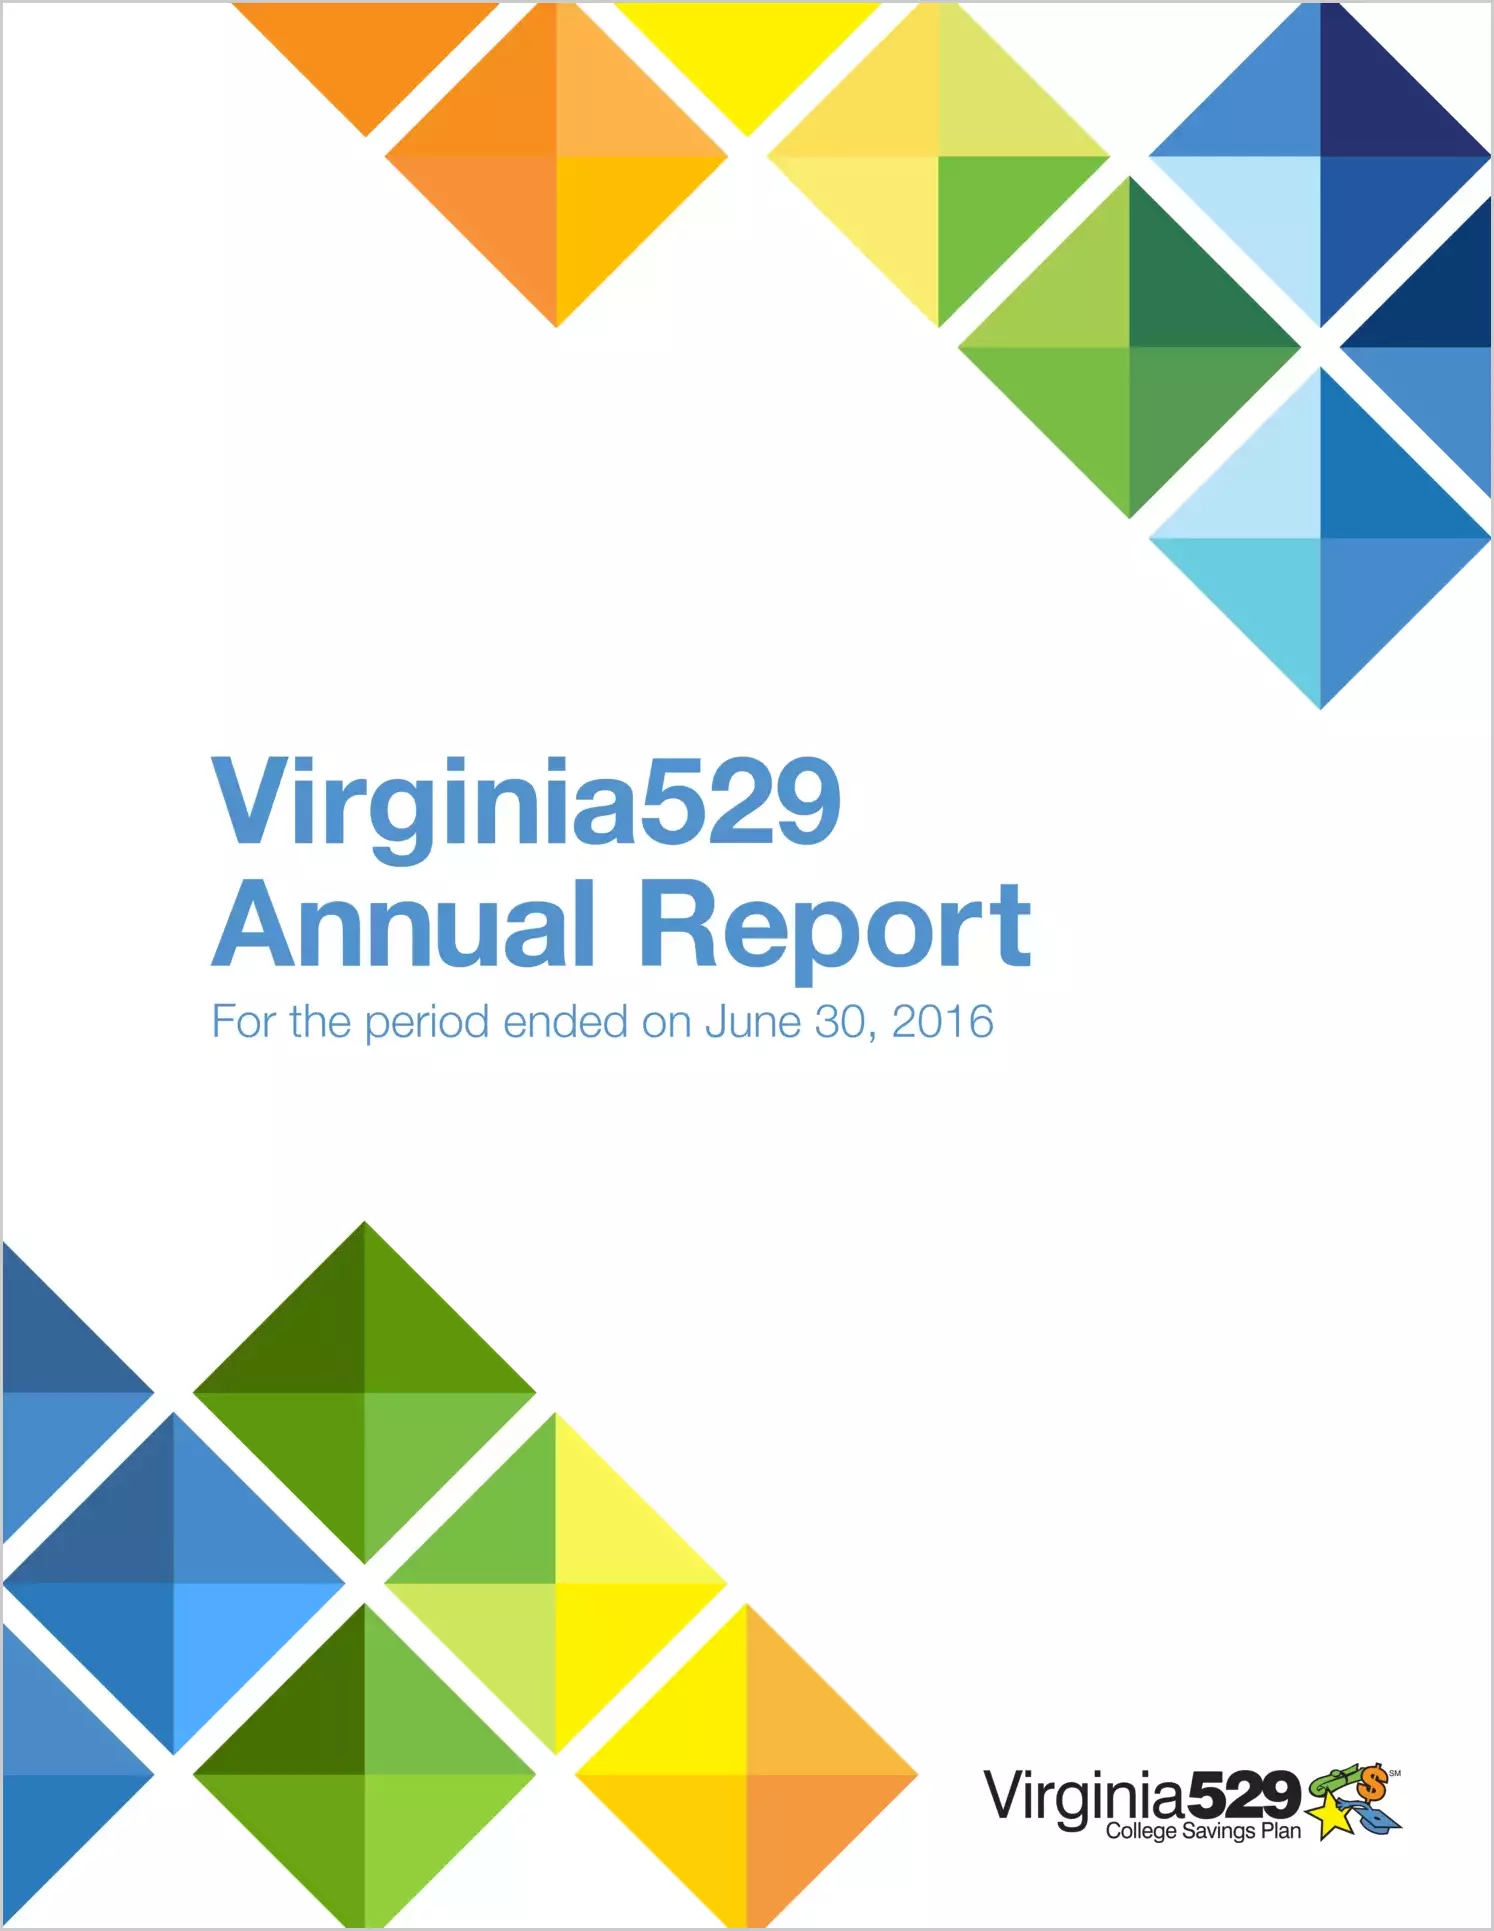 Virginia College Savings Plan Financial Statements for the year ended June 30, 2016